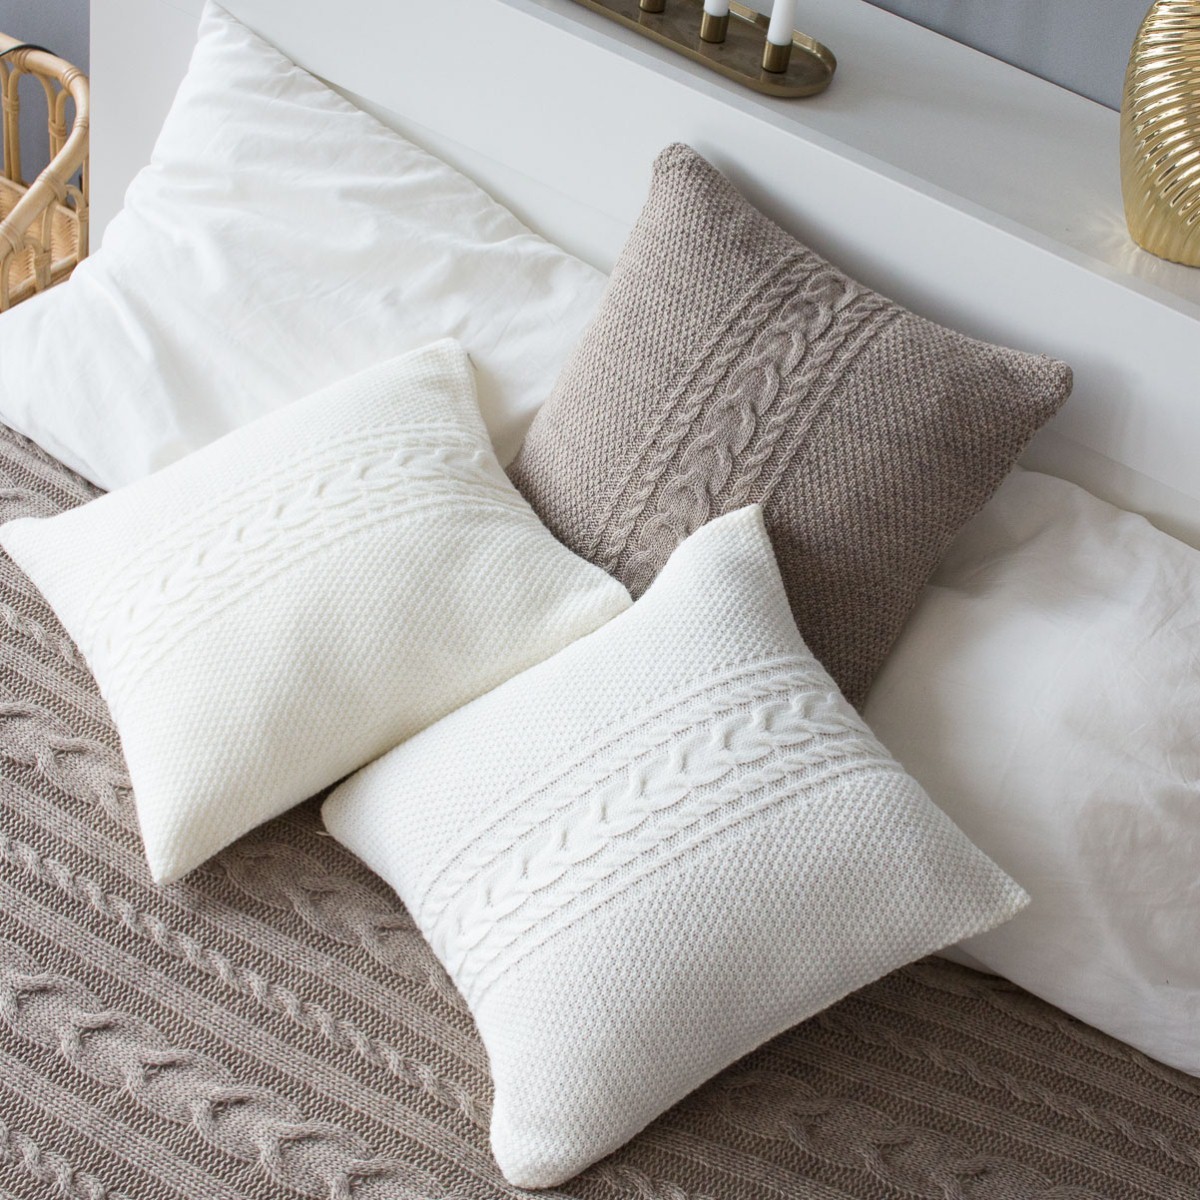 knitted pillow design photo